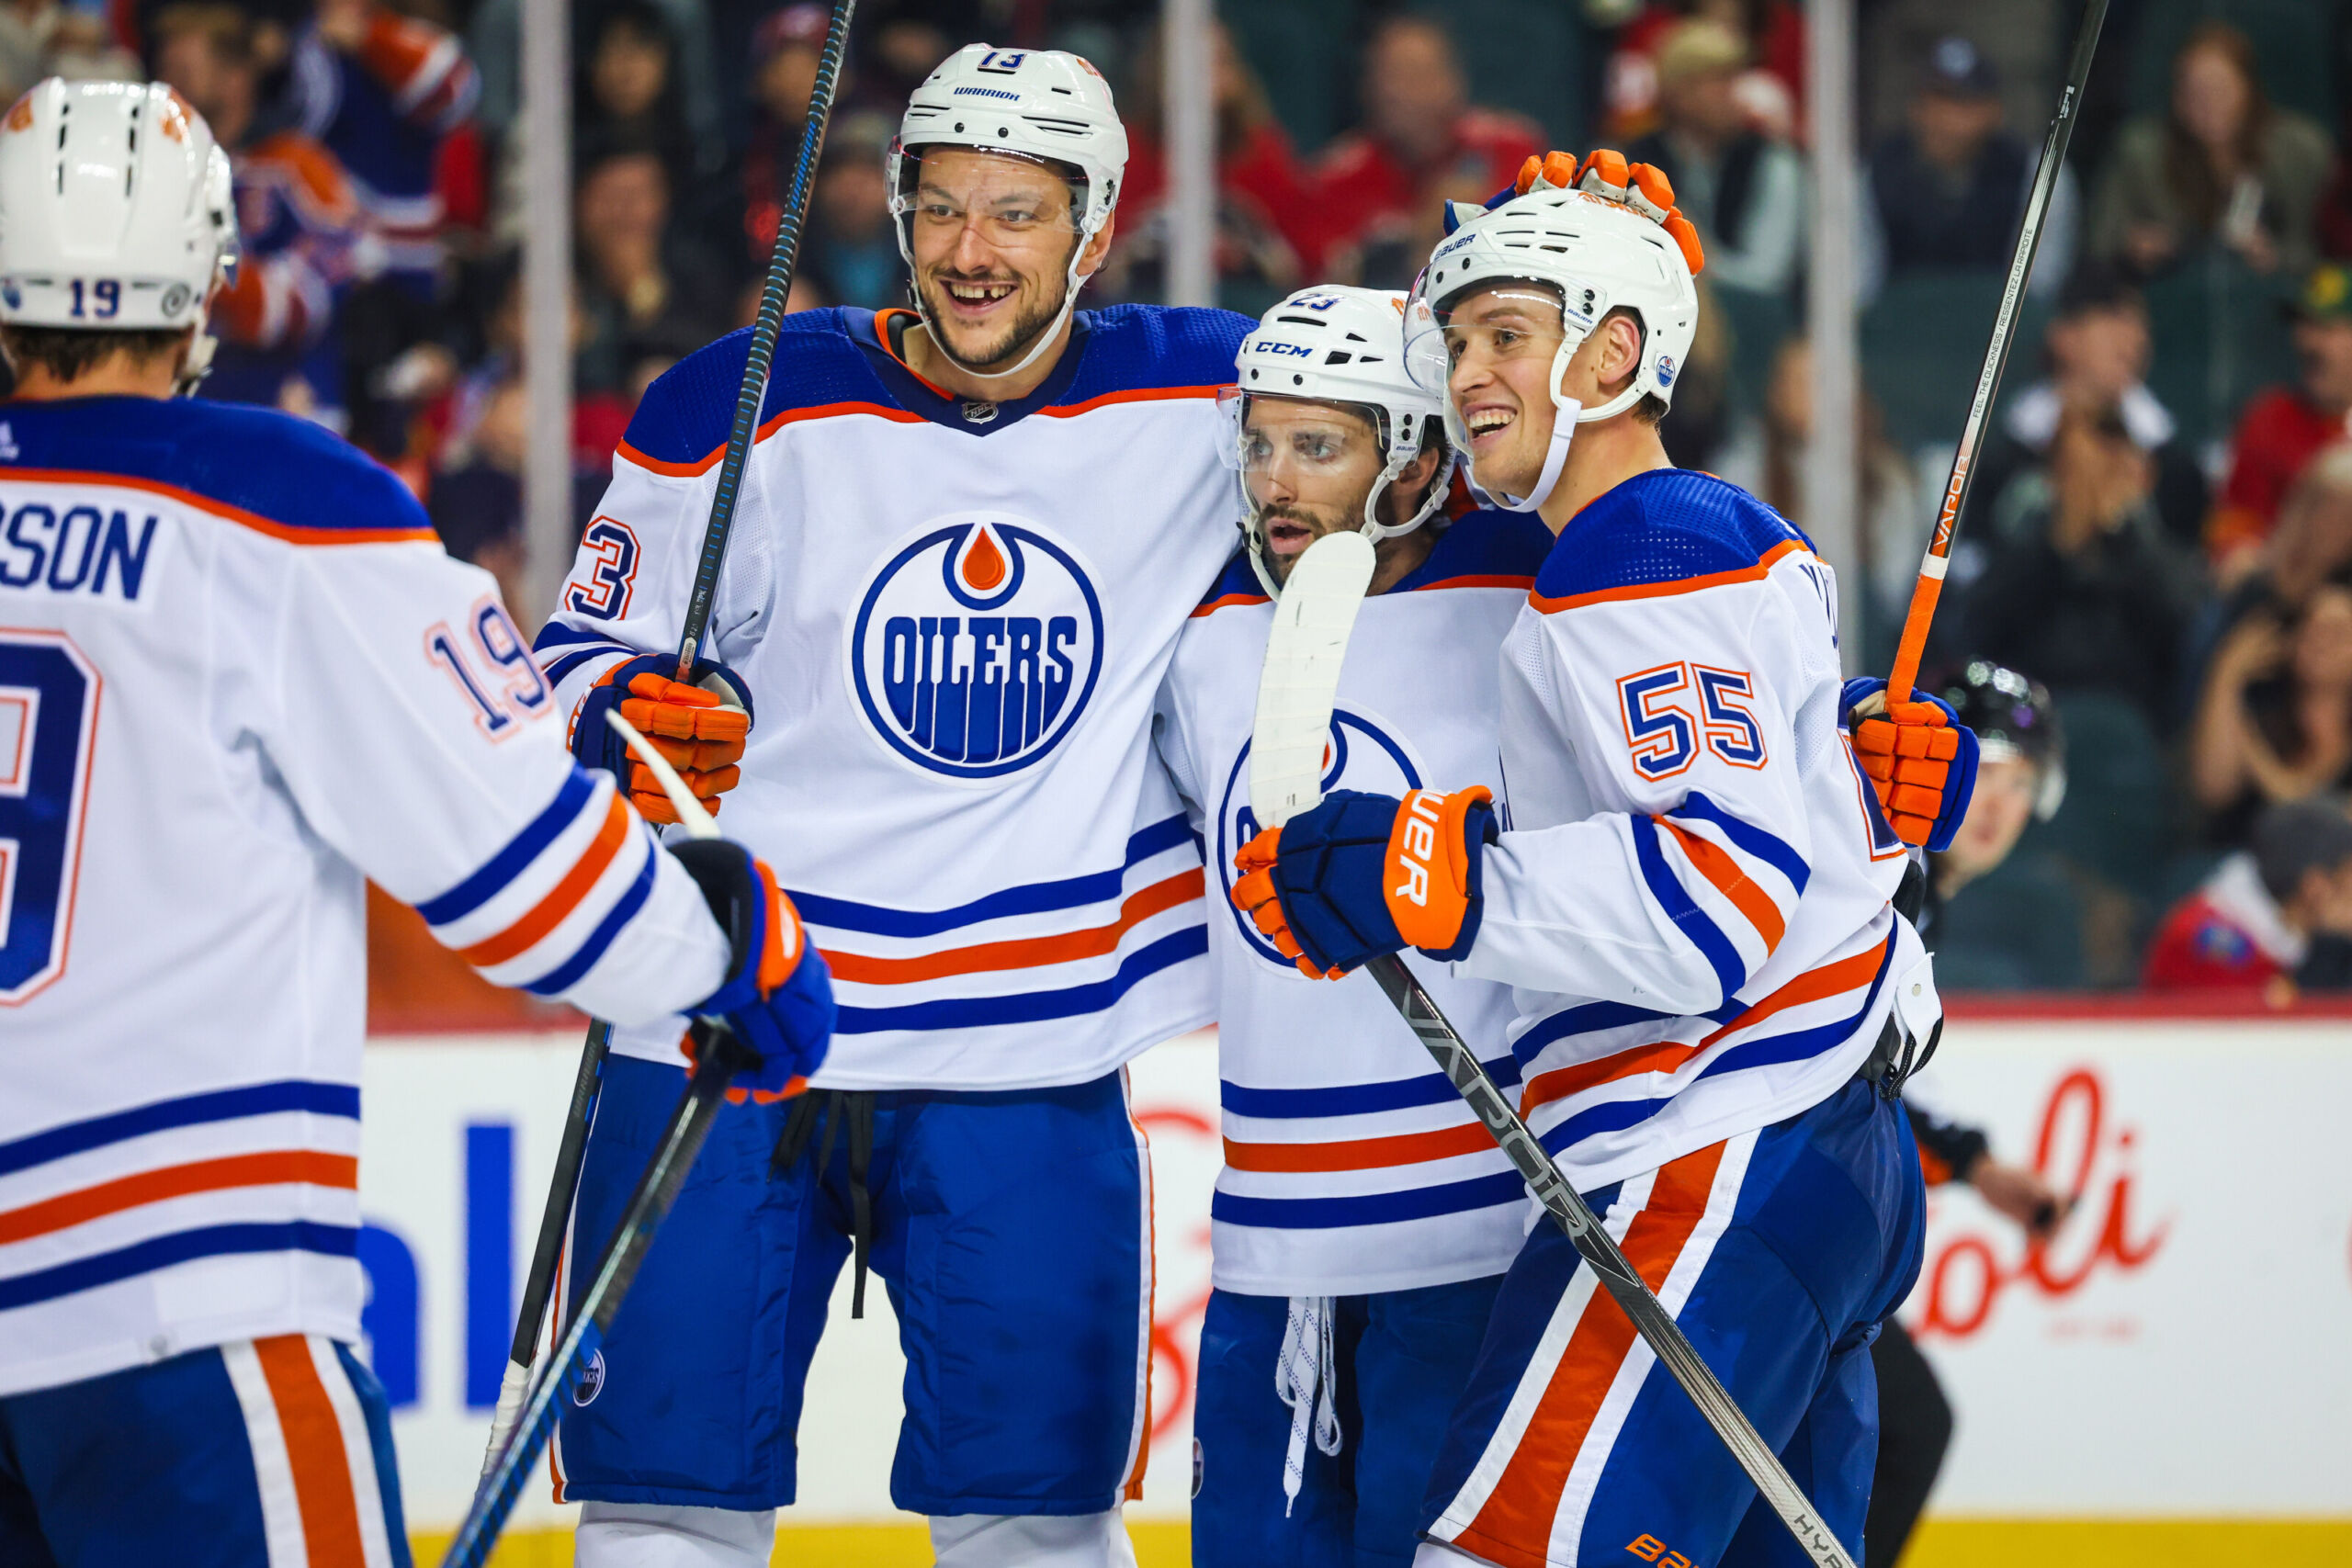 Edmonton Oilers' Holloway Should Not Only Make the Team, But Play Top-6